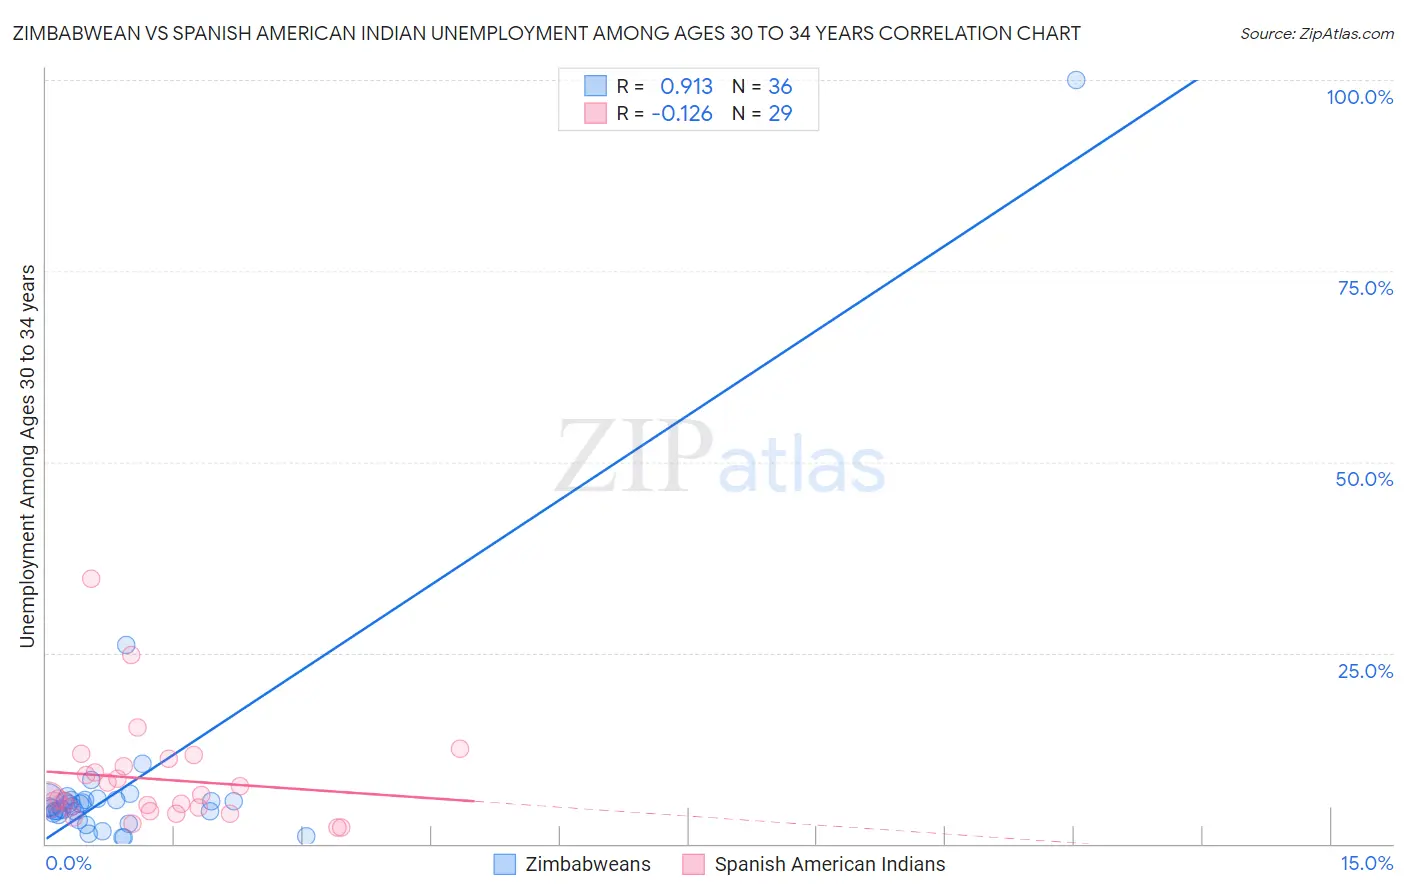 Zimbabwean vs Spanish American Indian Unemployment Among Ages 30 to 34 years